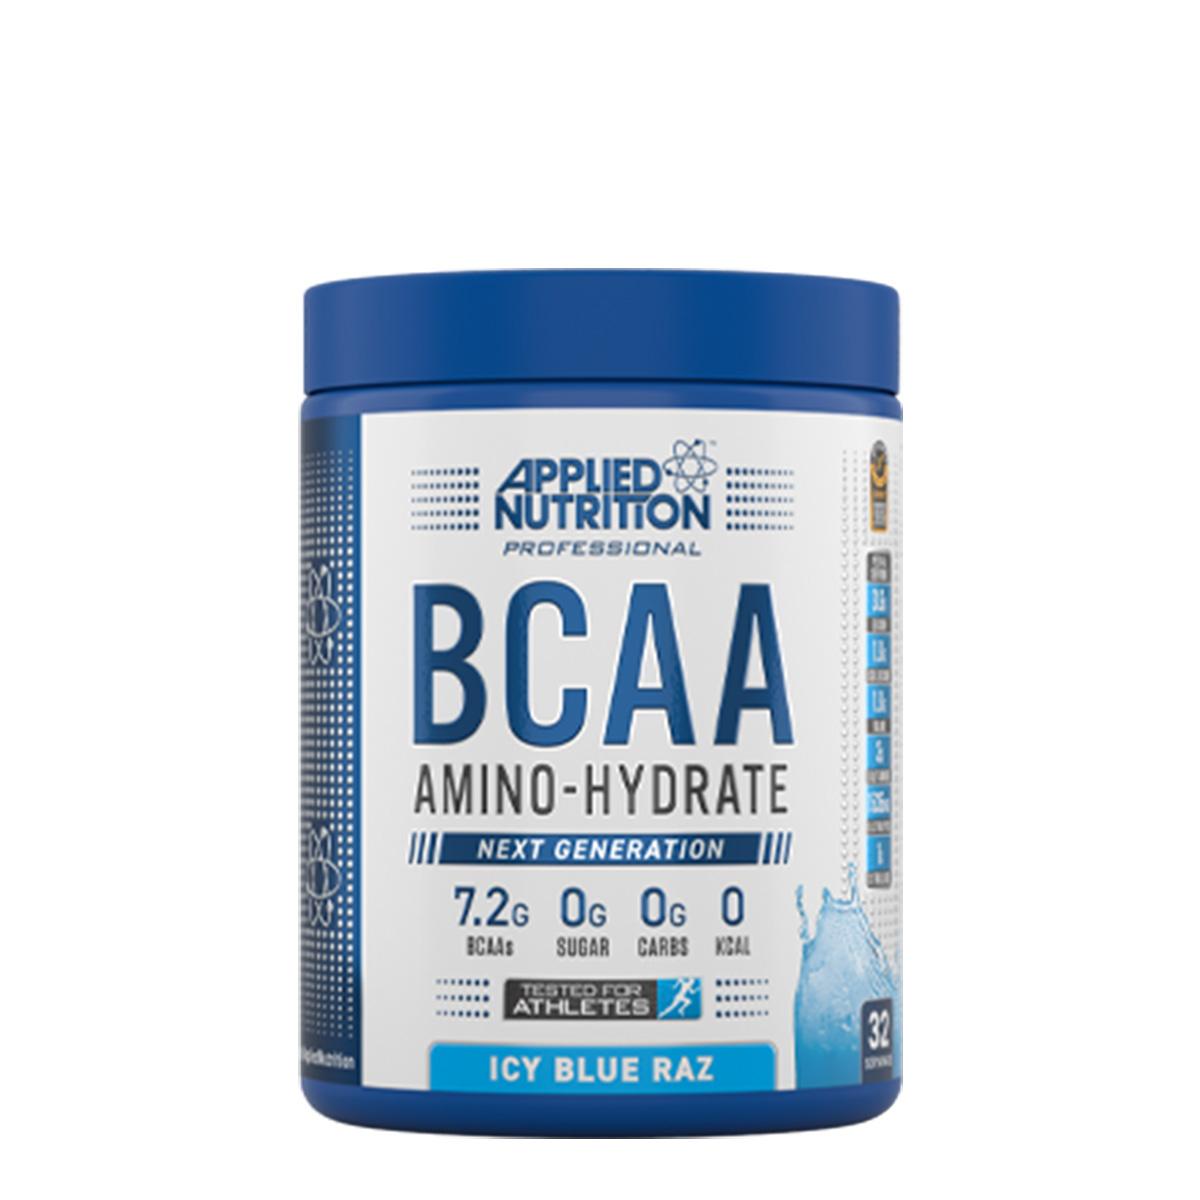 Selected image for APPLIED NUTRITION Aminokiseline BCAA  Amino Hydrate Plava malina 450g